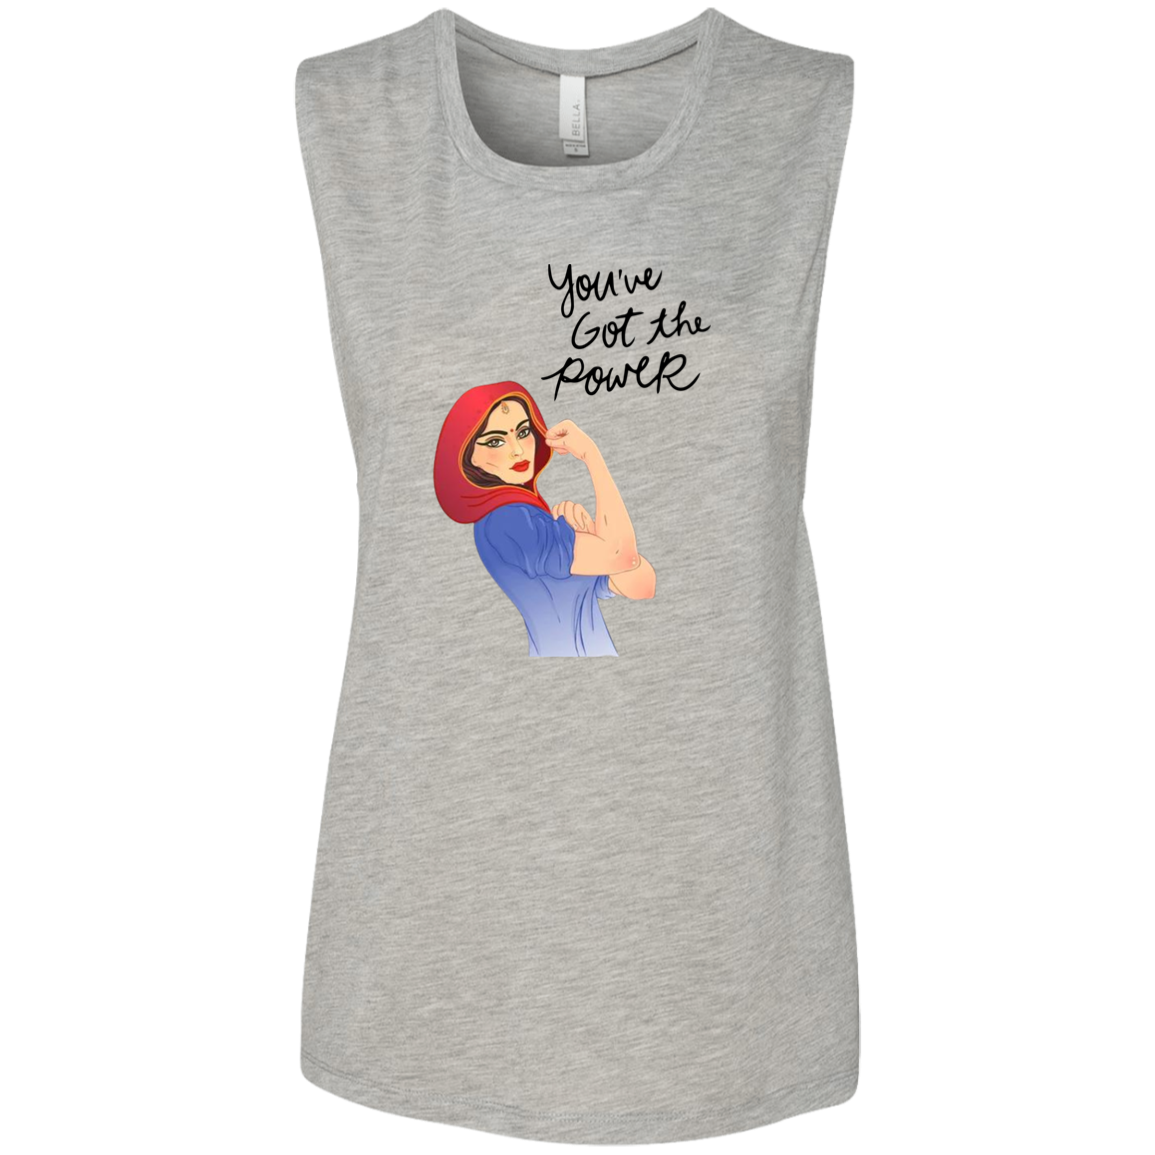 You Got The Power Ladies' Flowy Muscle Tank